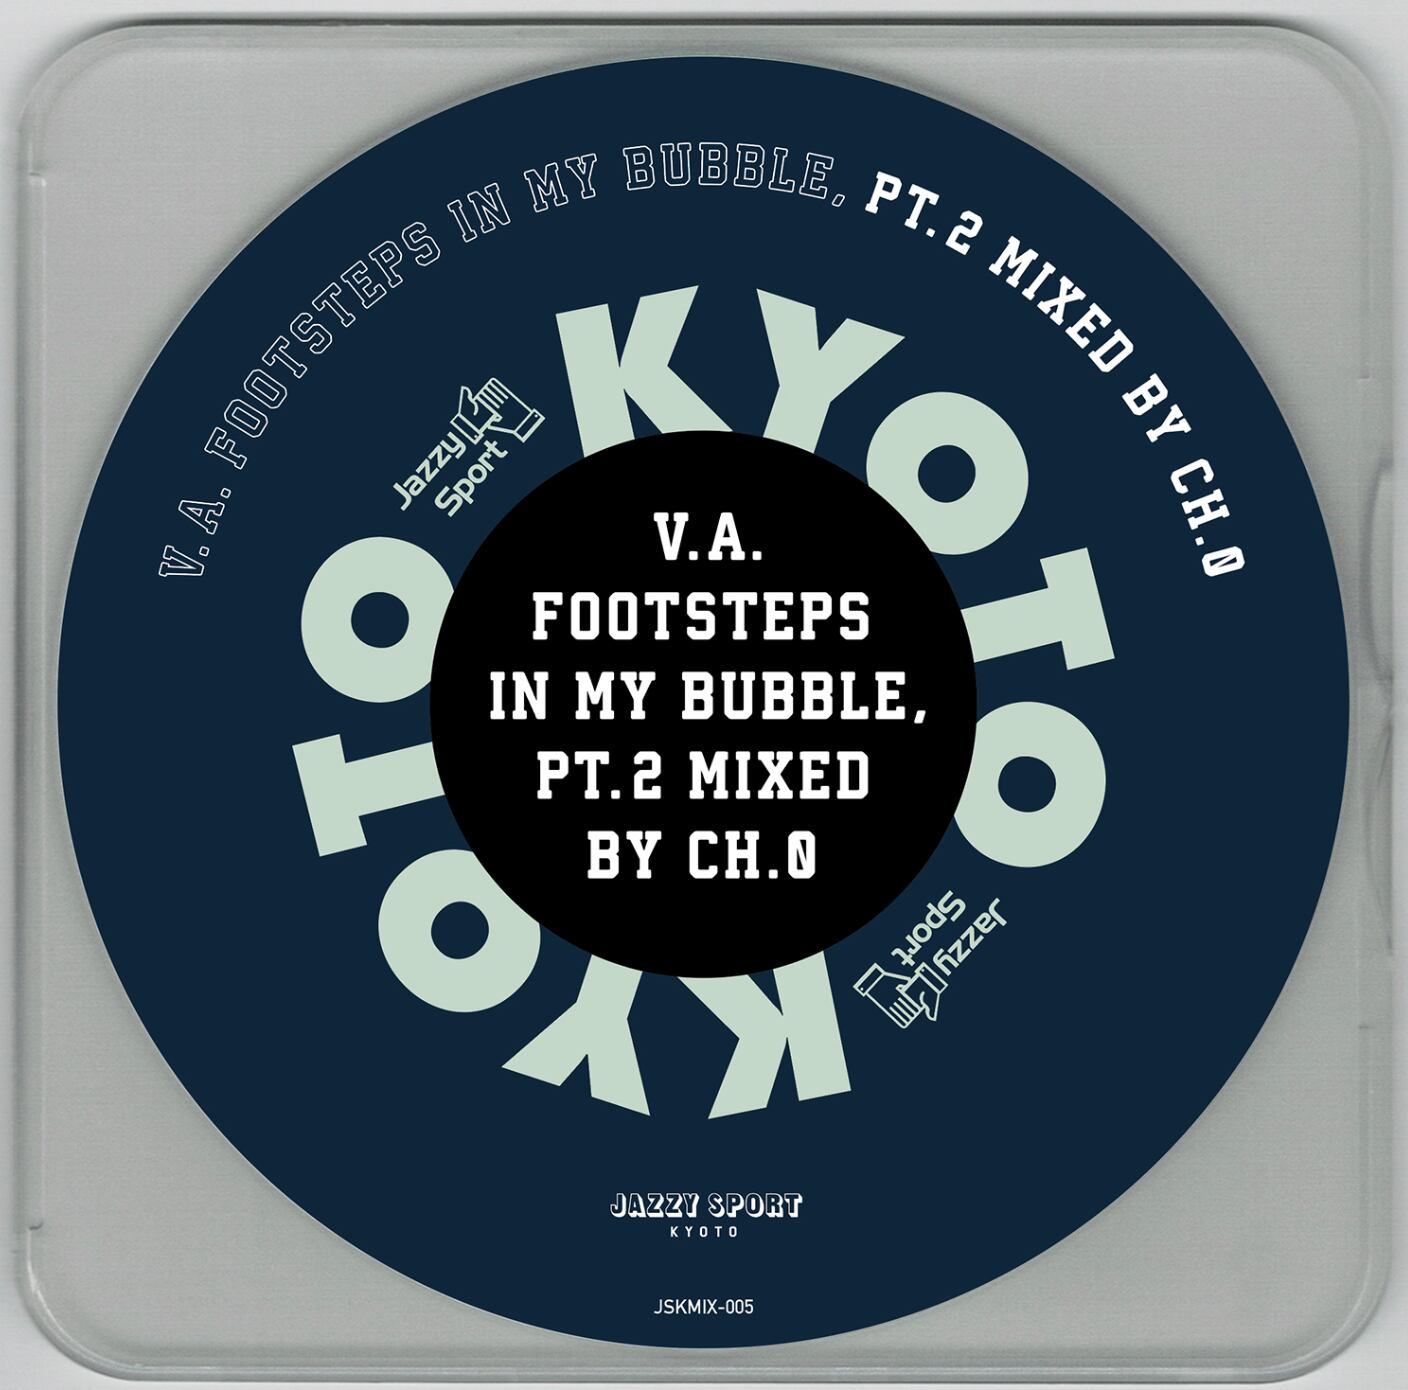 【CD】V.A. - Footsteps In My Bubble, Pt. 2 Mixed By CH.0